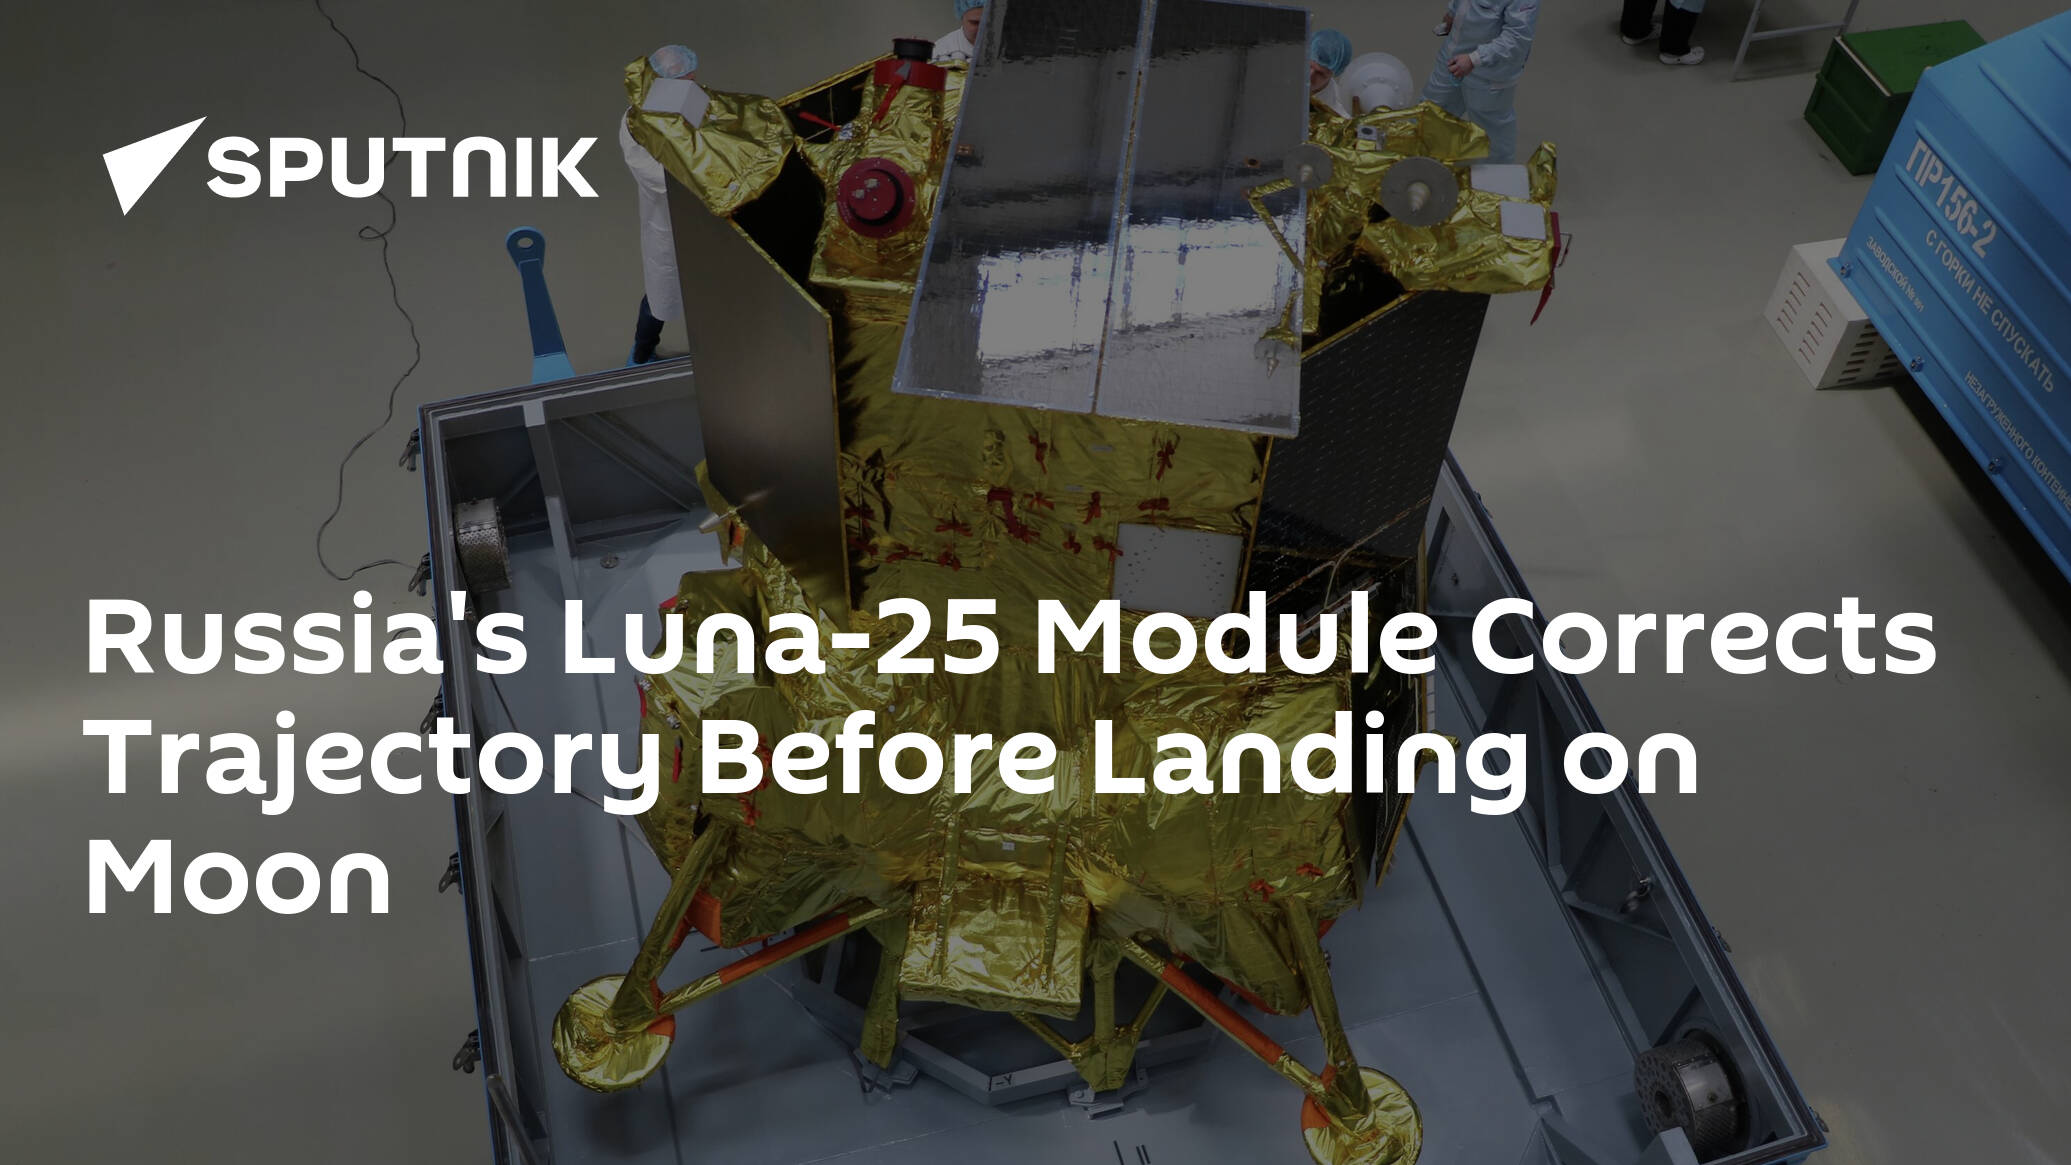 Russia's Luna-25 Module Corrects Trajectory Before Landing on Moon